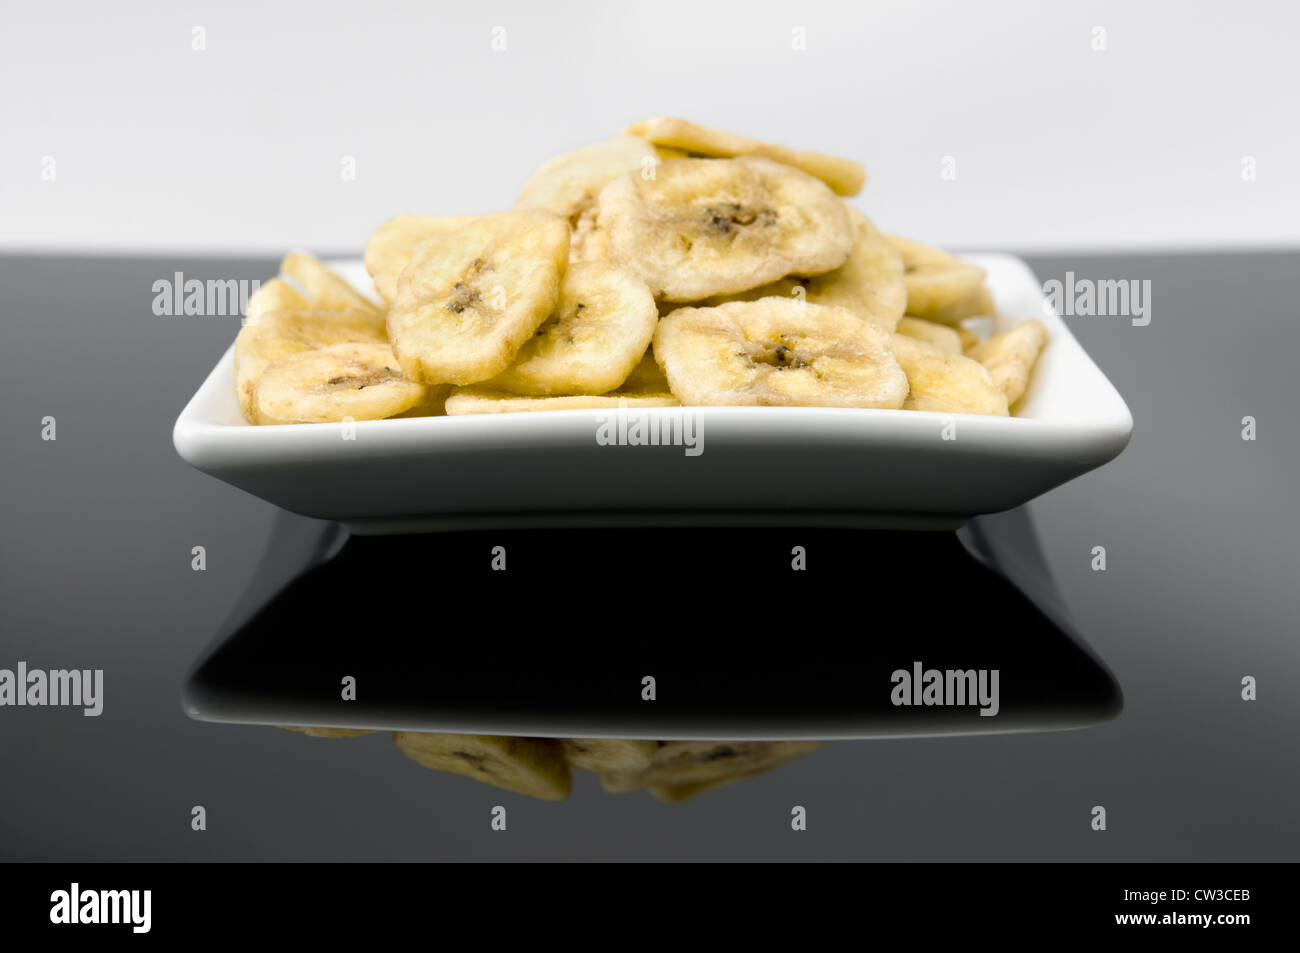 Dried banana chips in white bowl in black reflective surface against a white background Stock Photo